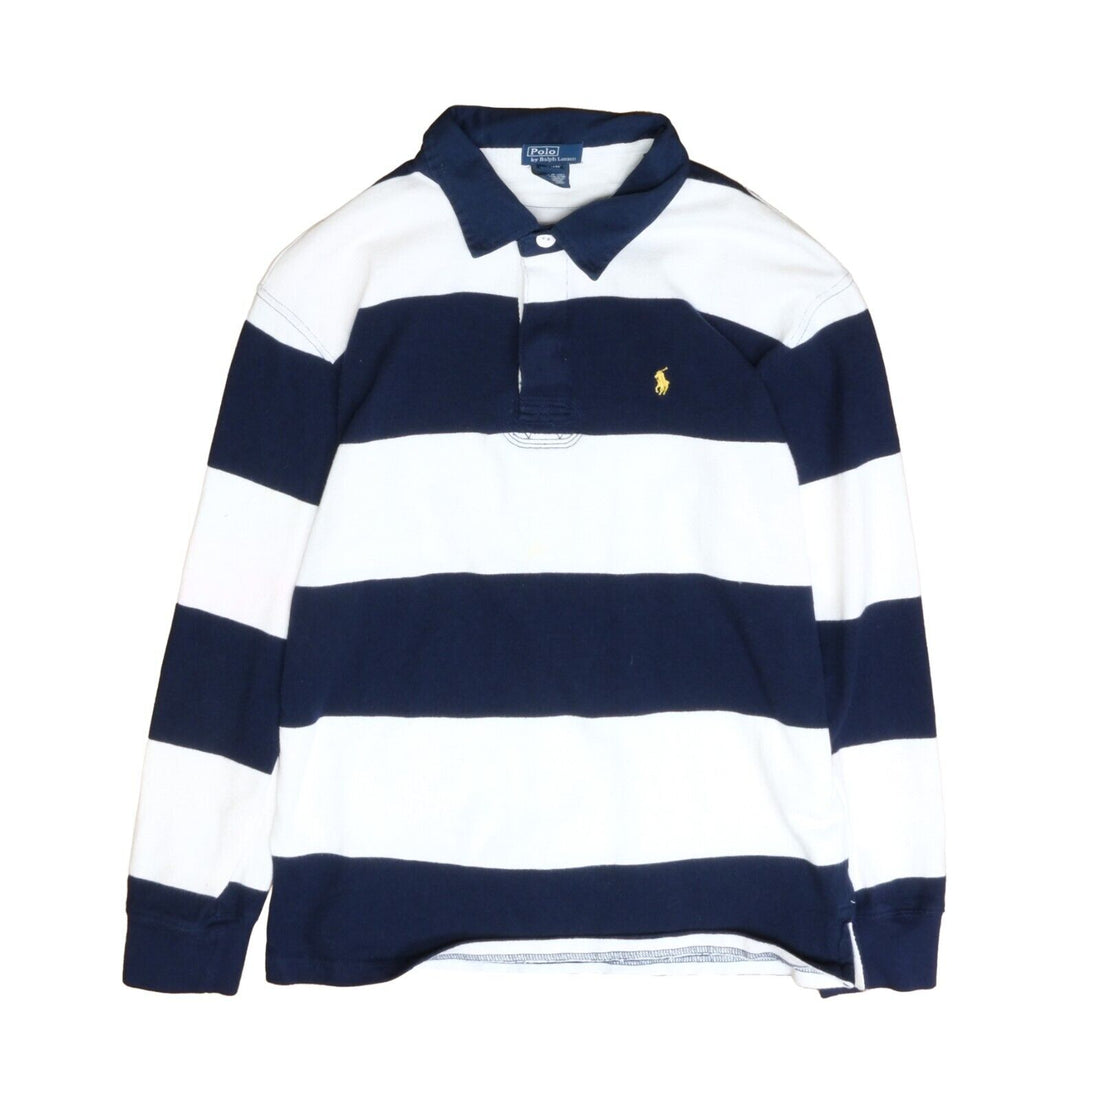 Vintage Polo Ralph Lauren Rugby Shirt Size Large White Blue Striped Long Sleeve